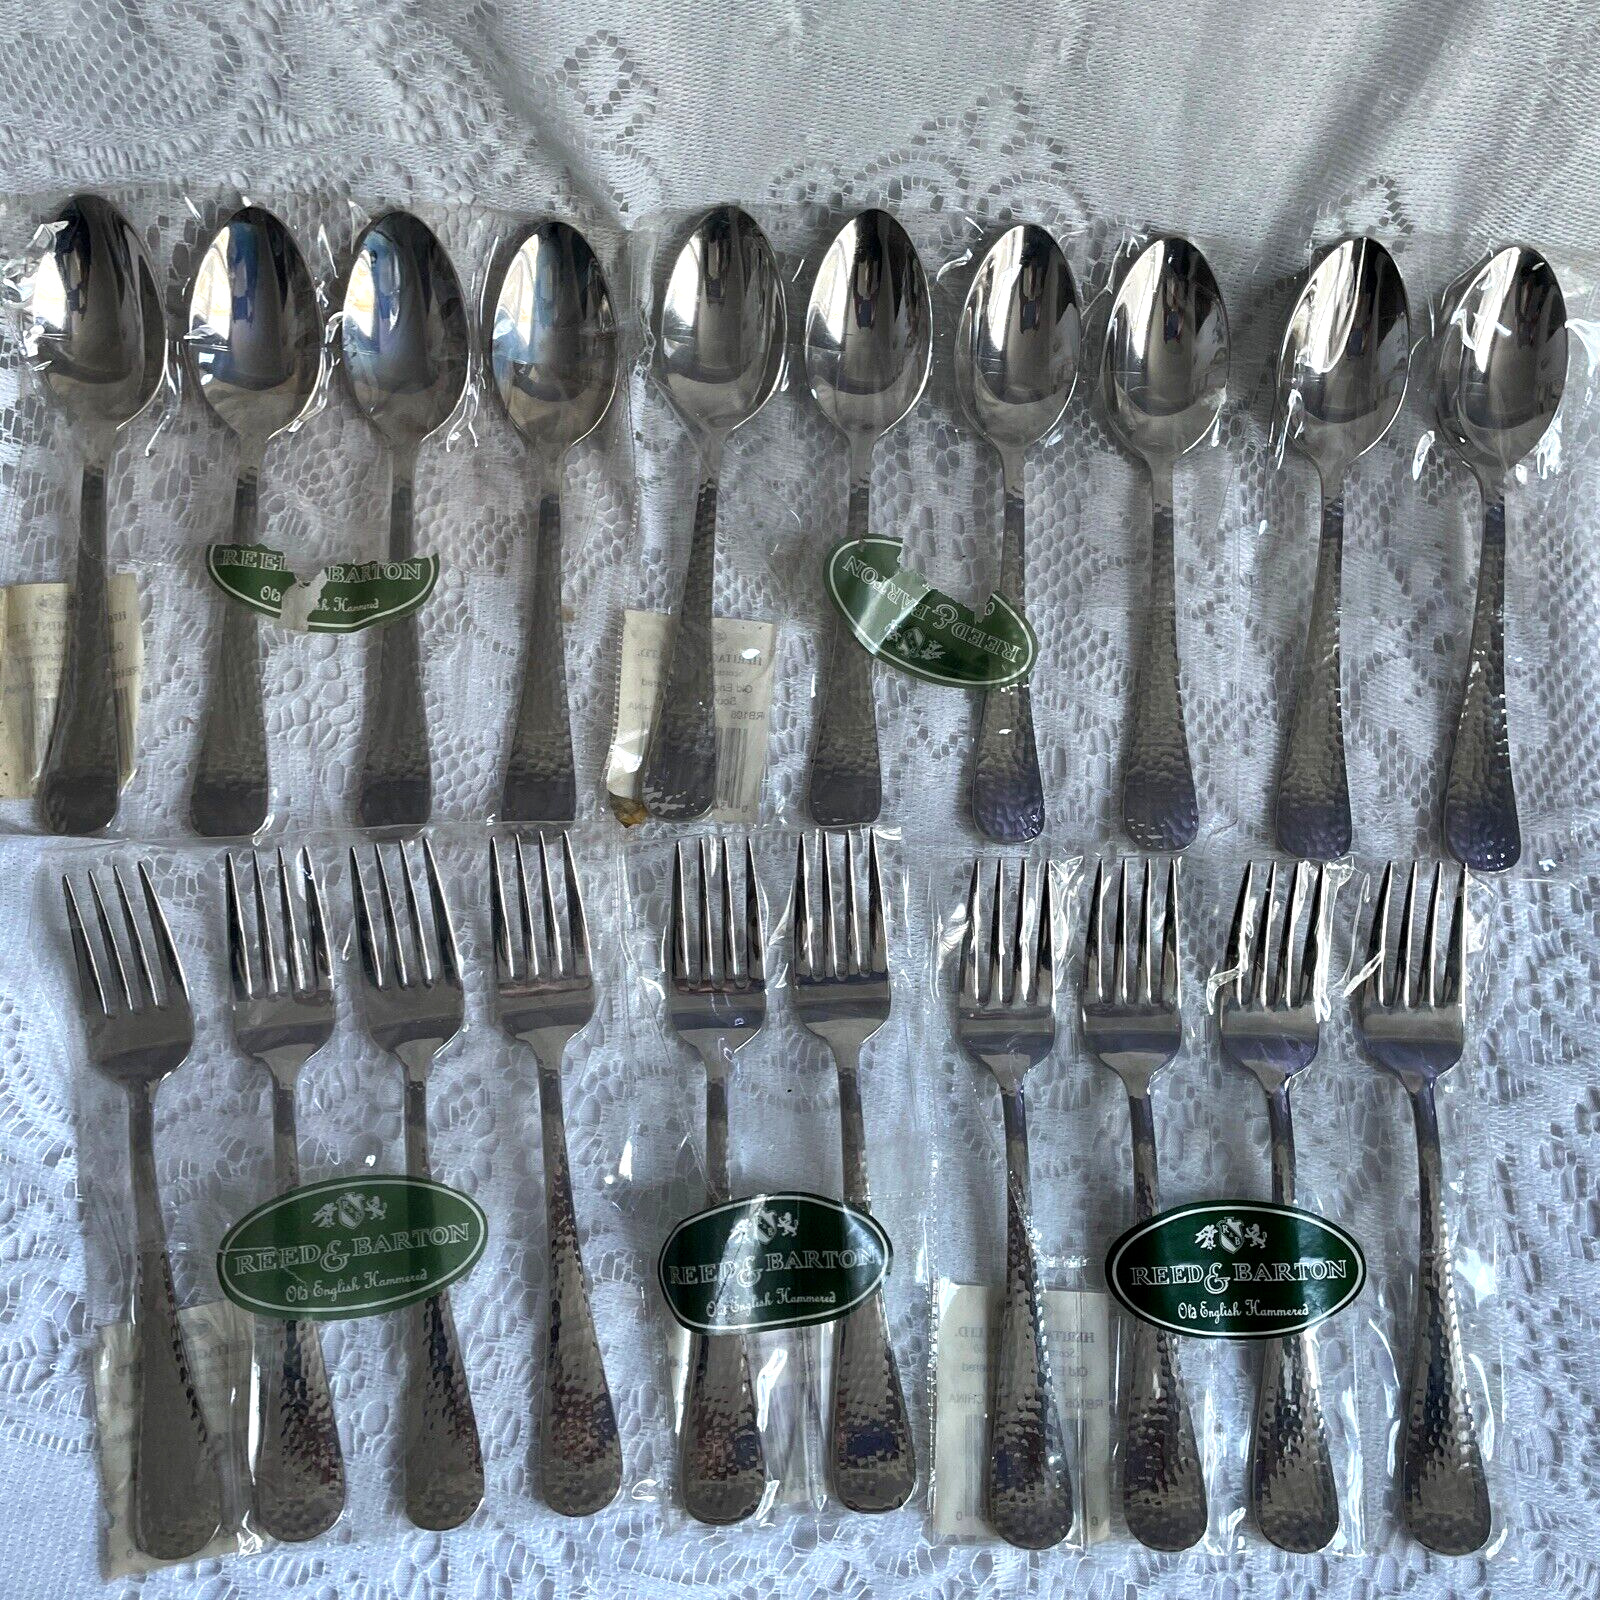 OLD ENGLISH HAMMERED REED & BARTON SERVICE FOR 10/50 pcs. FLATWARE SET NEW